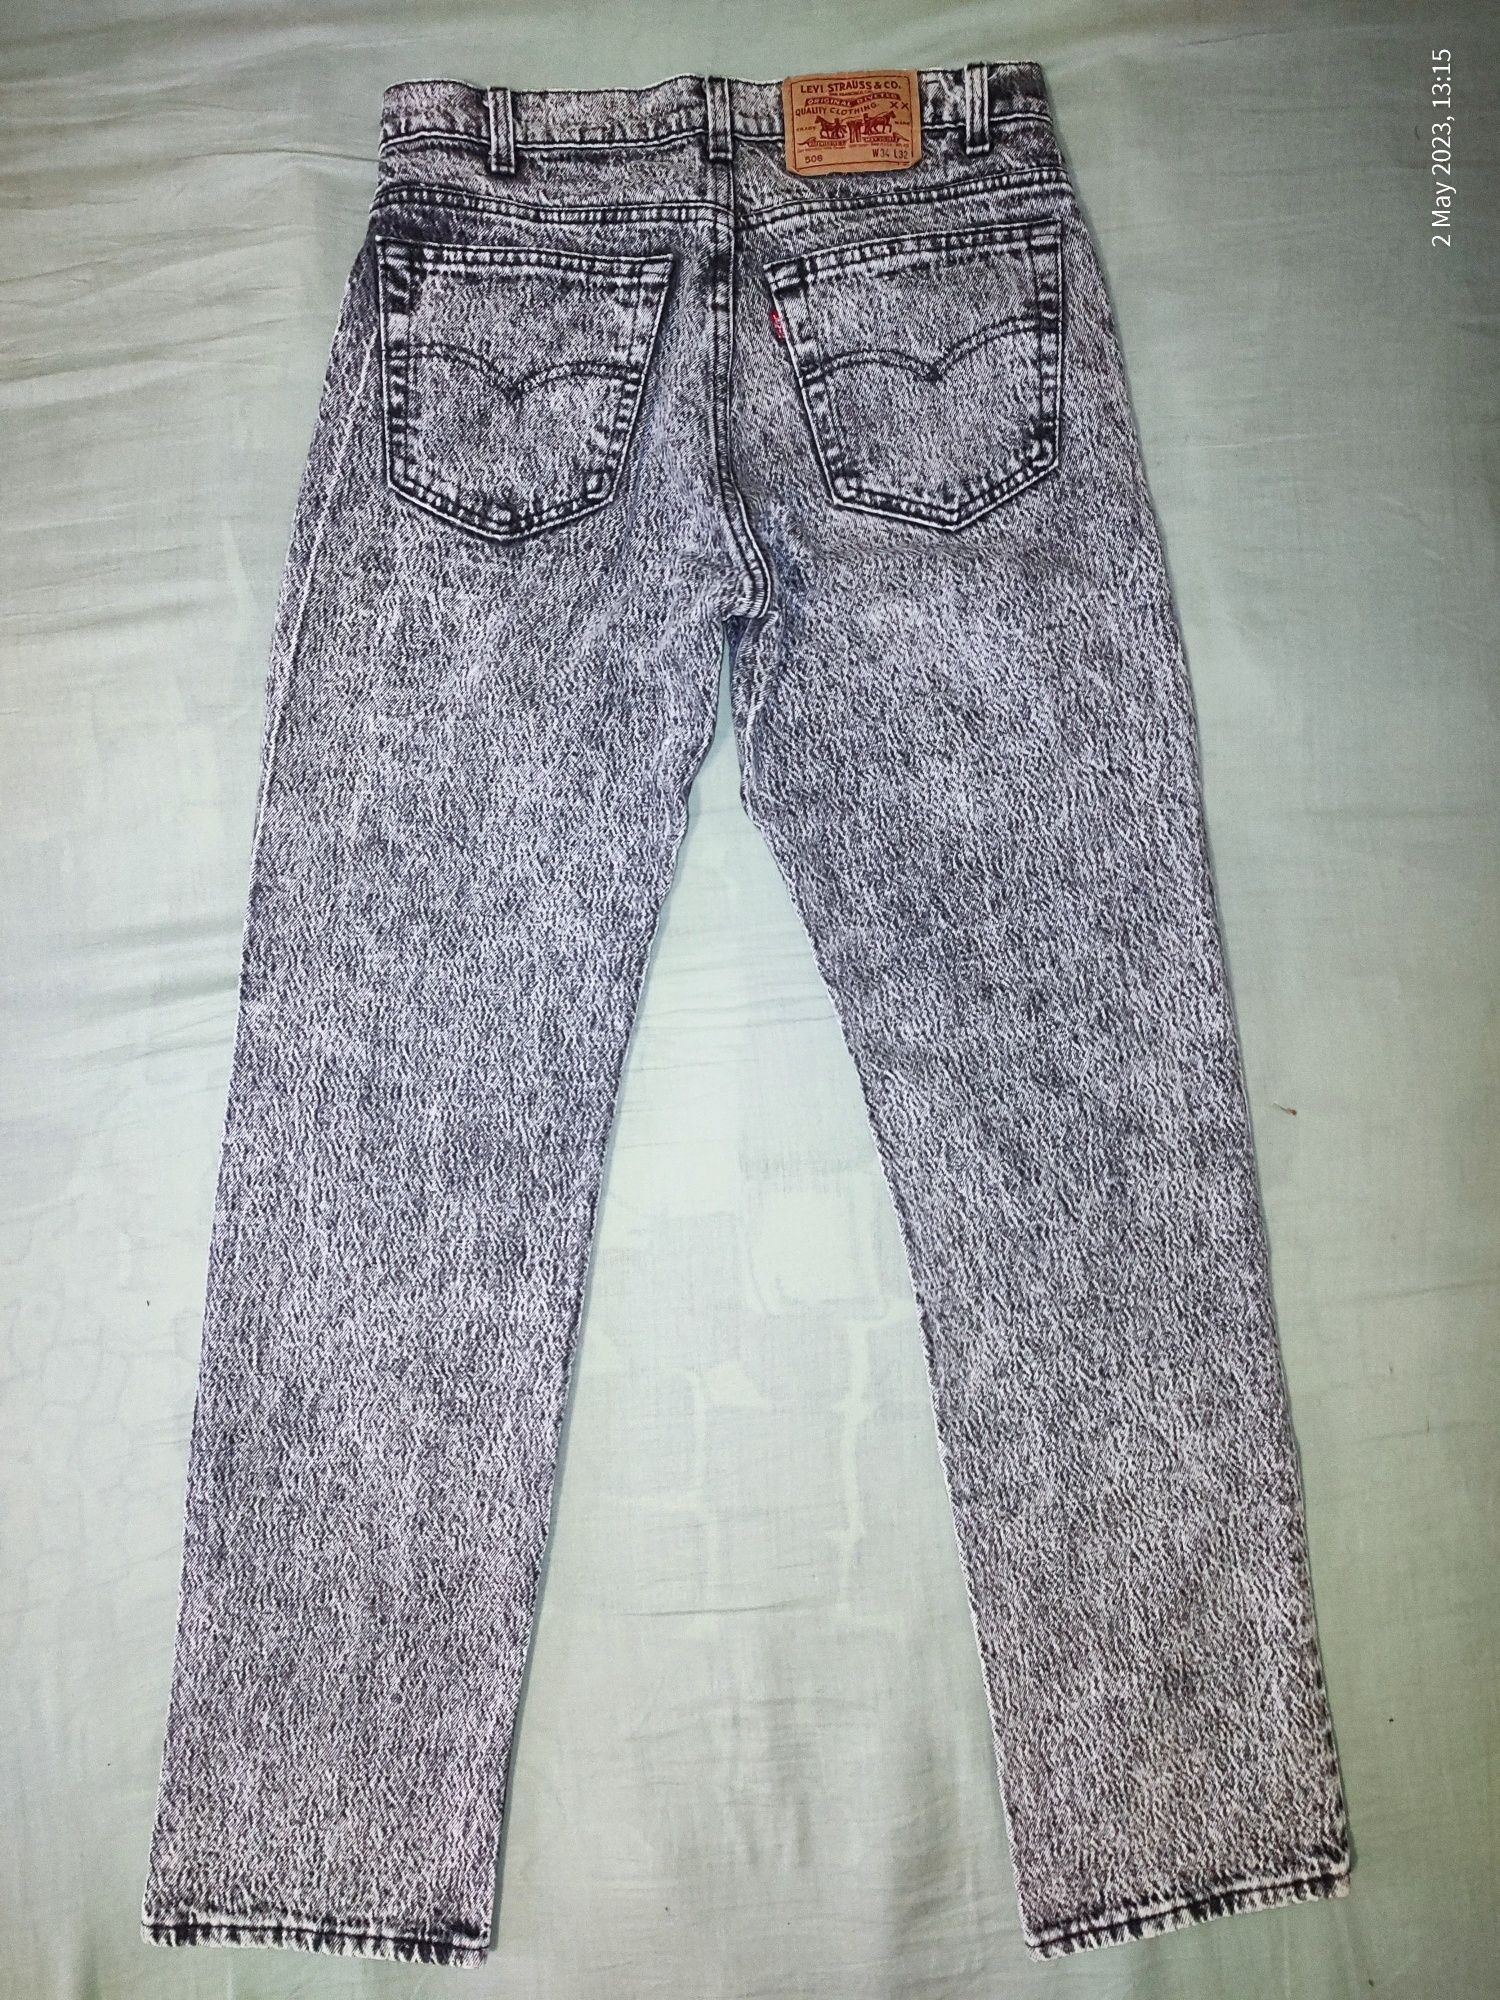 Levi's 506 32x32 vintage 80's made in USA